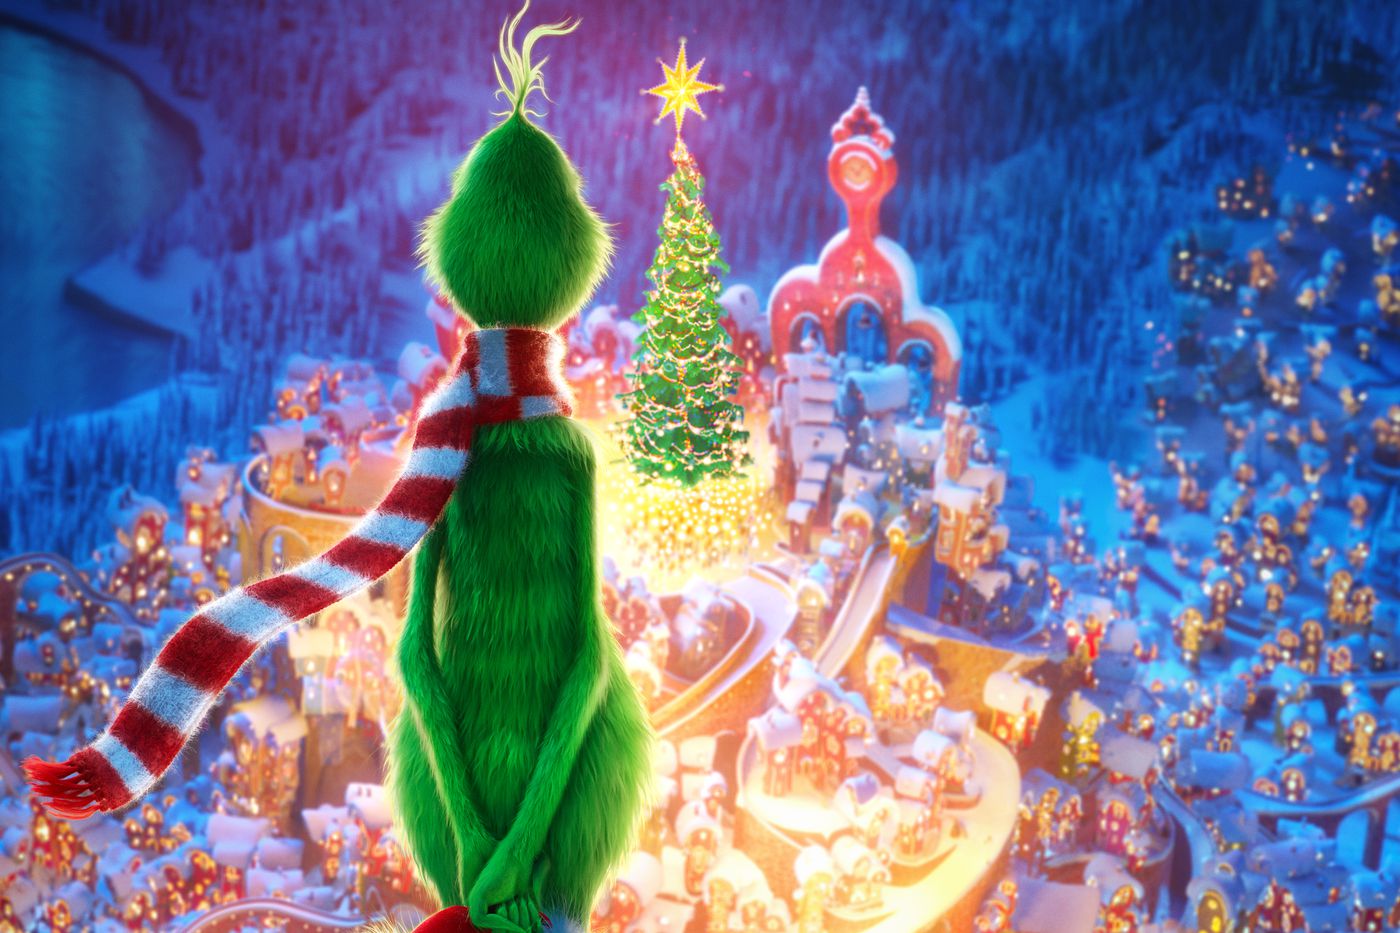 The grinch poster